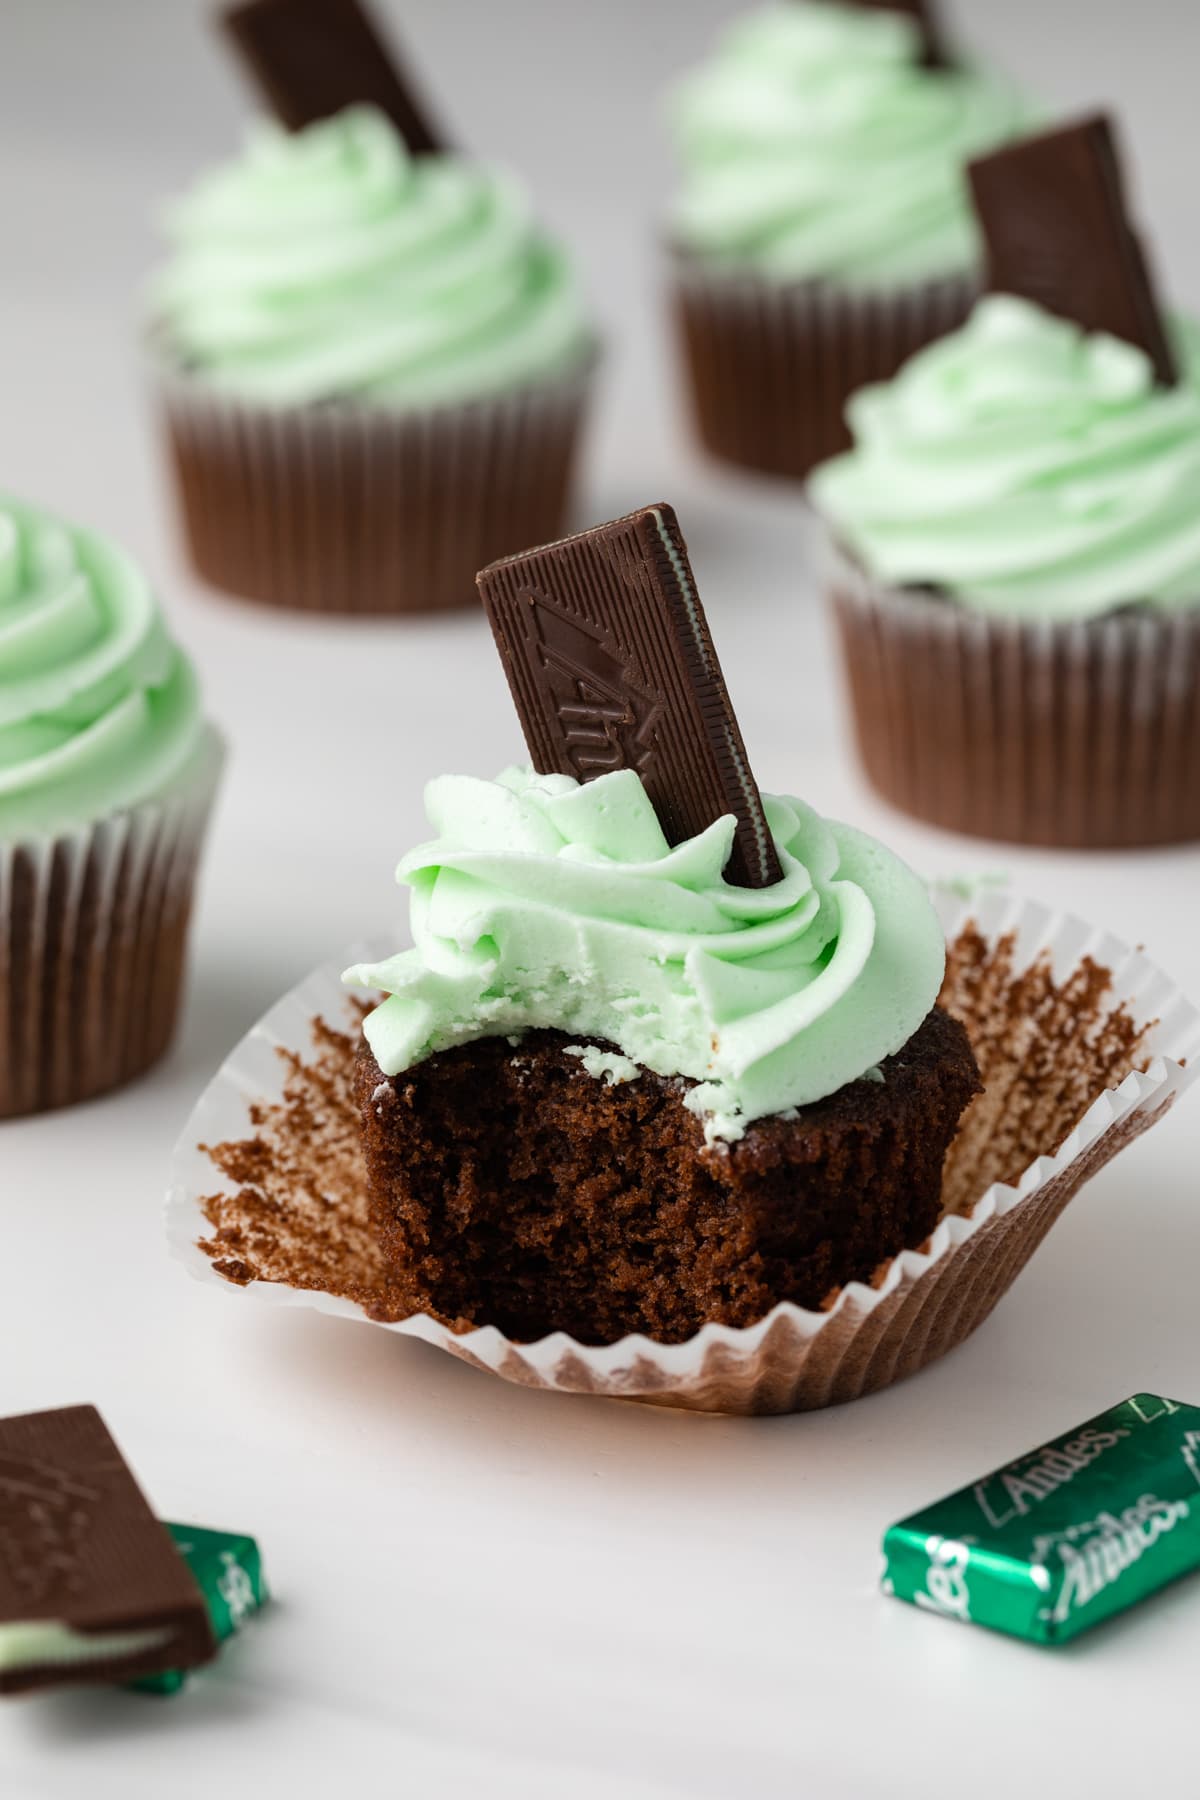 Andes mint cupcake with a bite taken out.